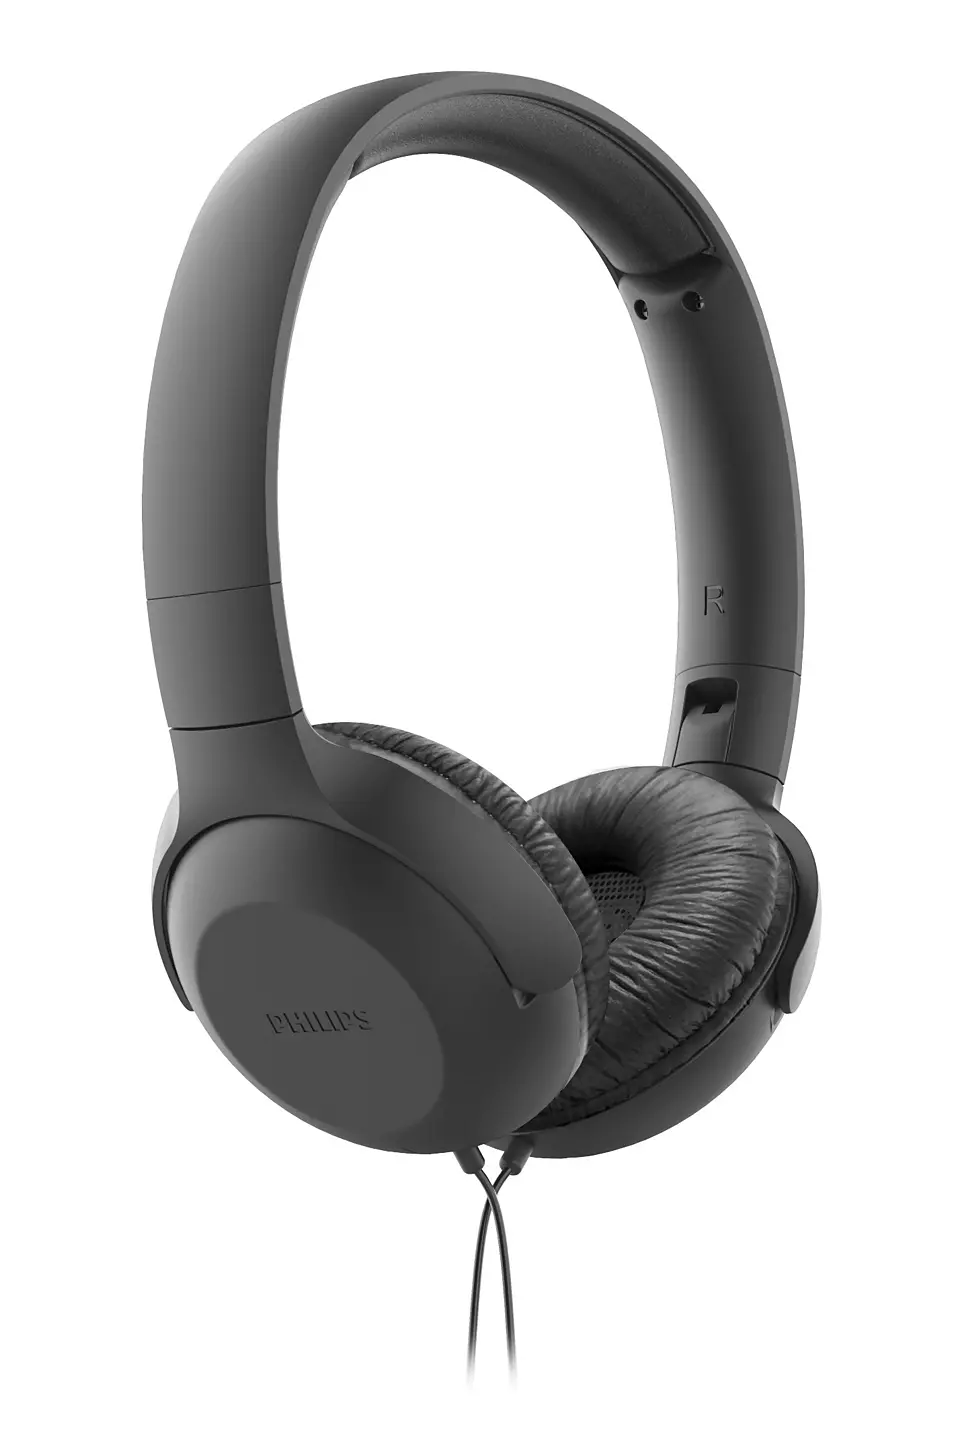 AURICULARES PHILIPS TAUH201 CON MICROFONO